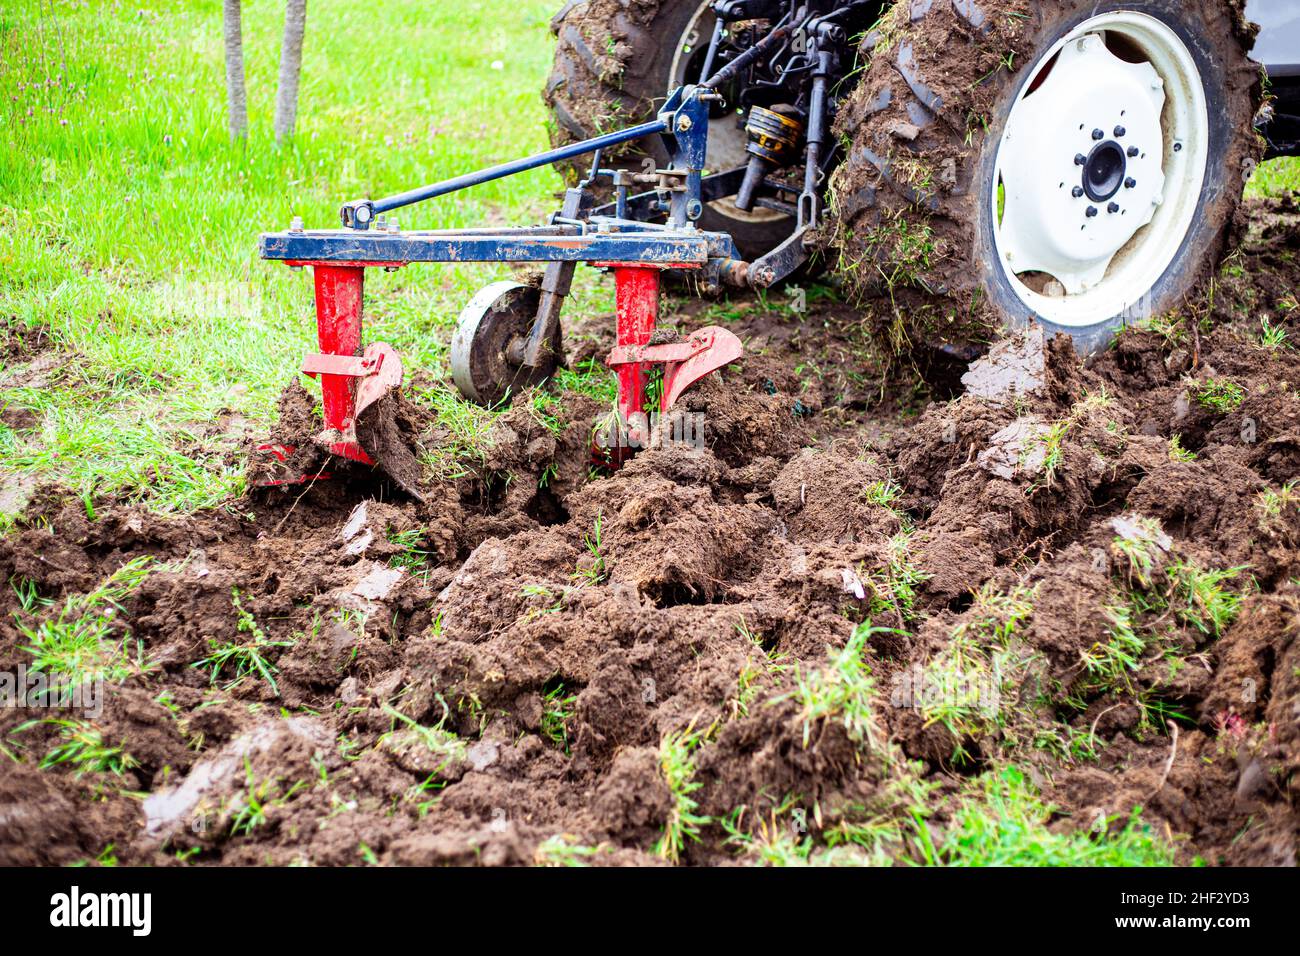 The tractor plows the land in the garden with a plow in early spring. Preparing the soil for planting crops. Stock Photo